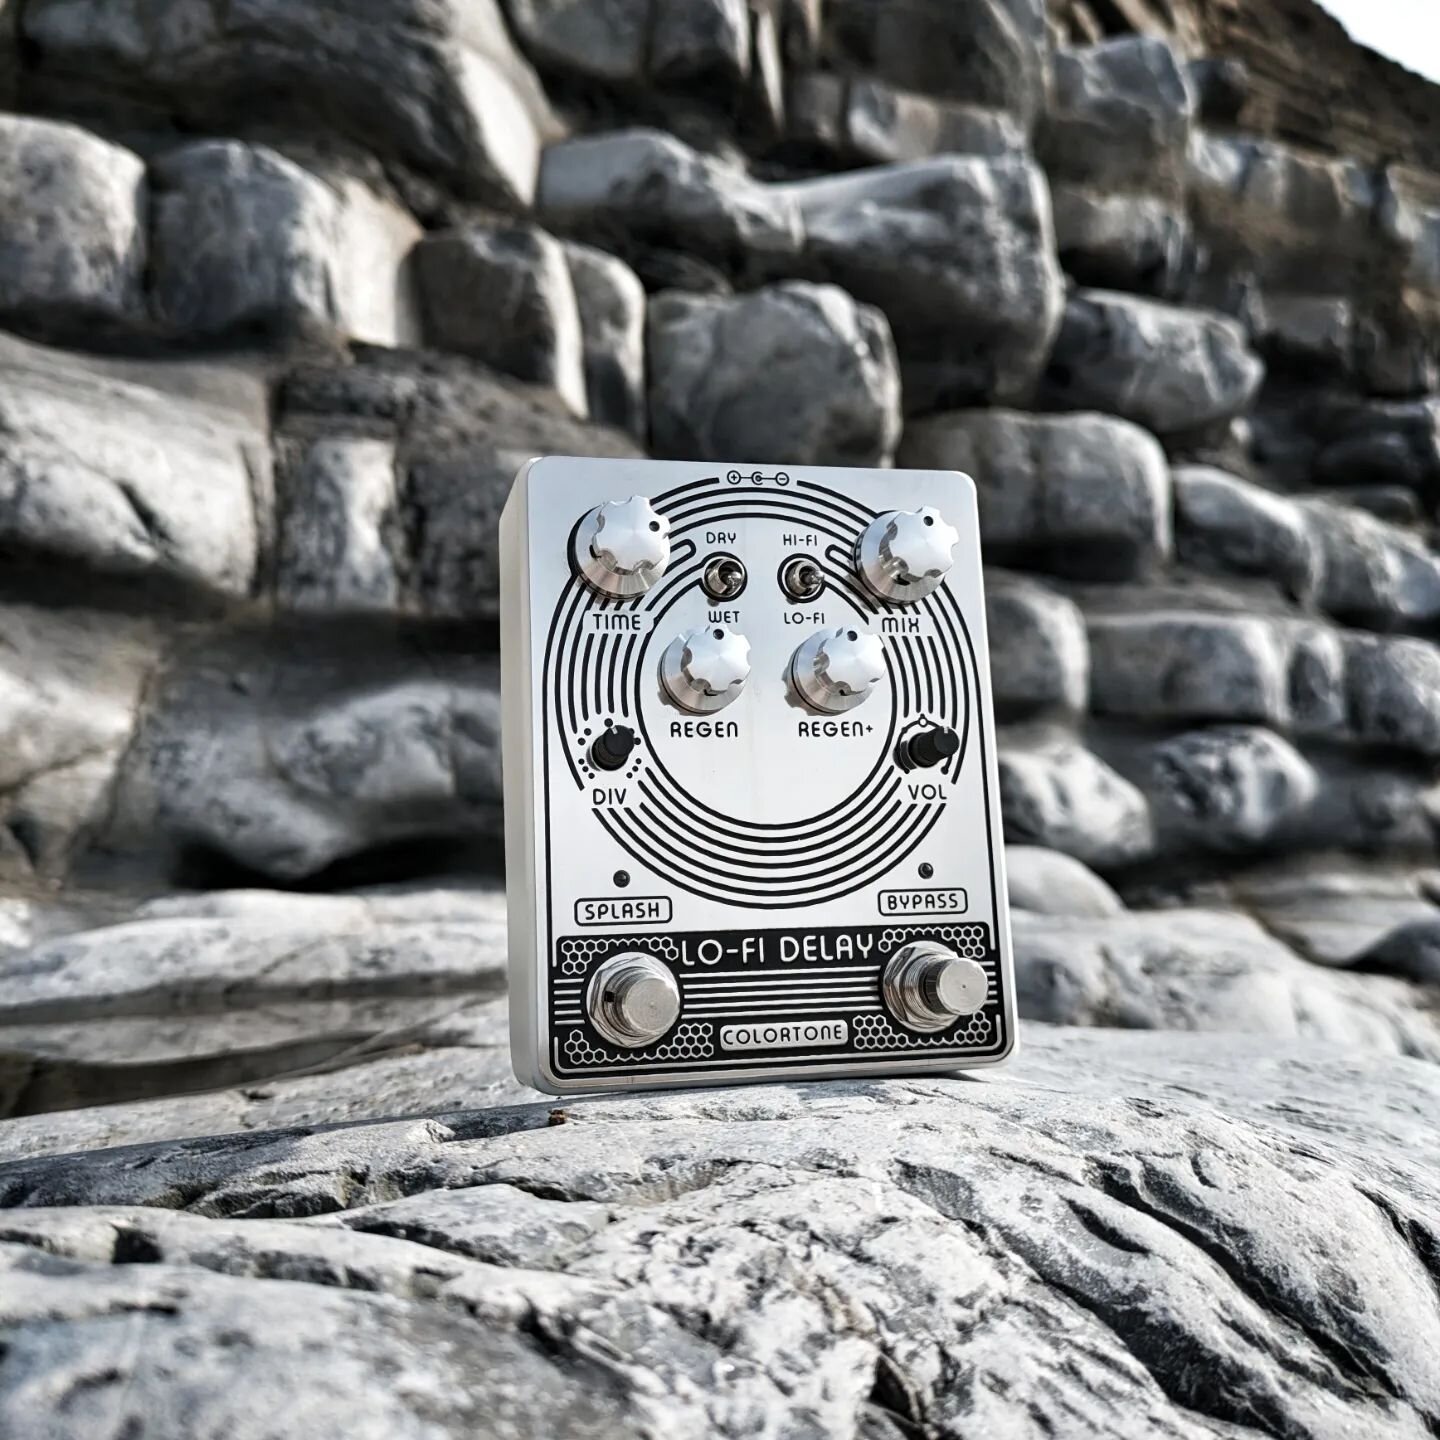 Somewhere between here and somewhere else Vol #1
*
*
*
*
UK trip - Location -Southerndown Wales
*
*
*
*
#colortonepedals #guitarpedal #pedalporn #stompbox #effector #guitarplayer #handmade #walesadventure #adventure